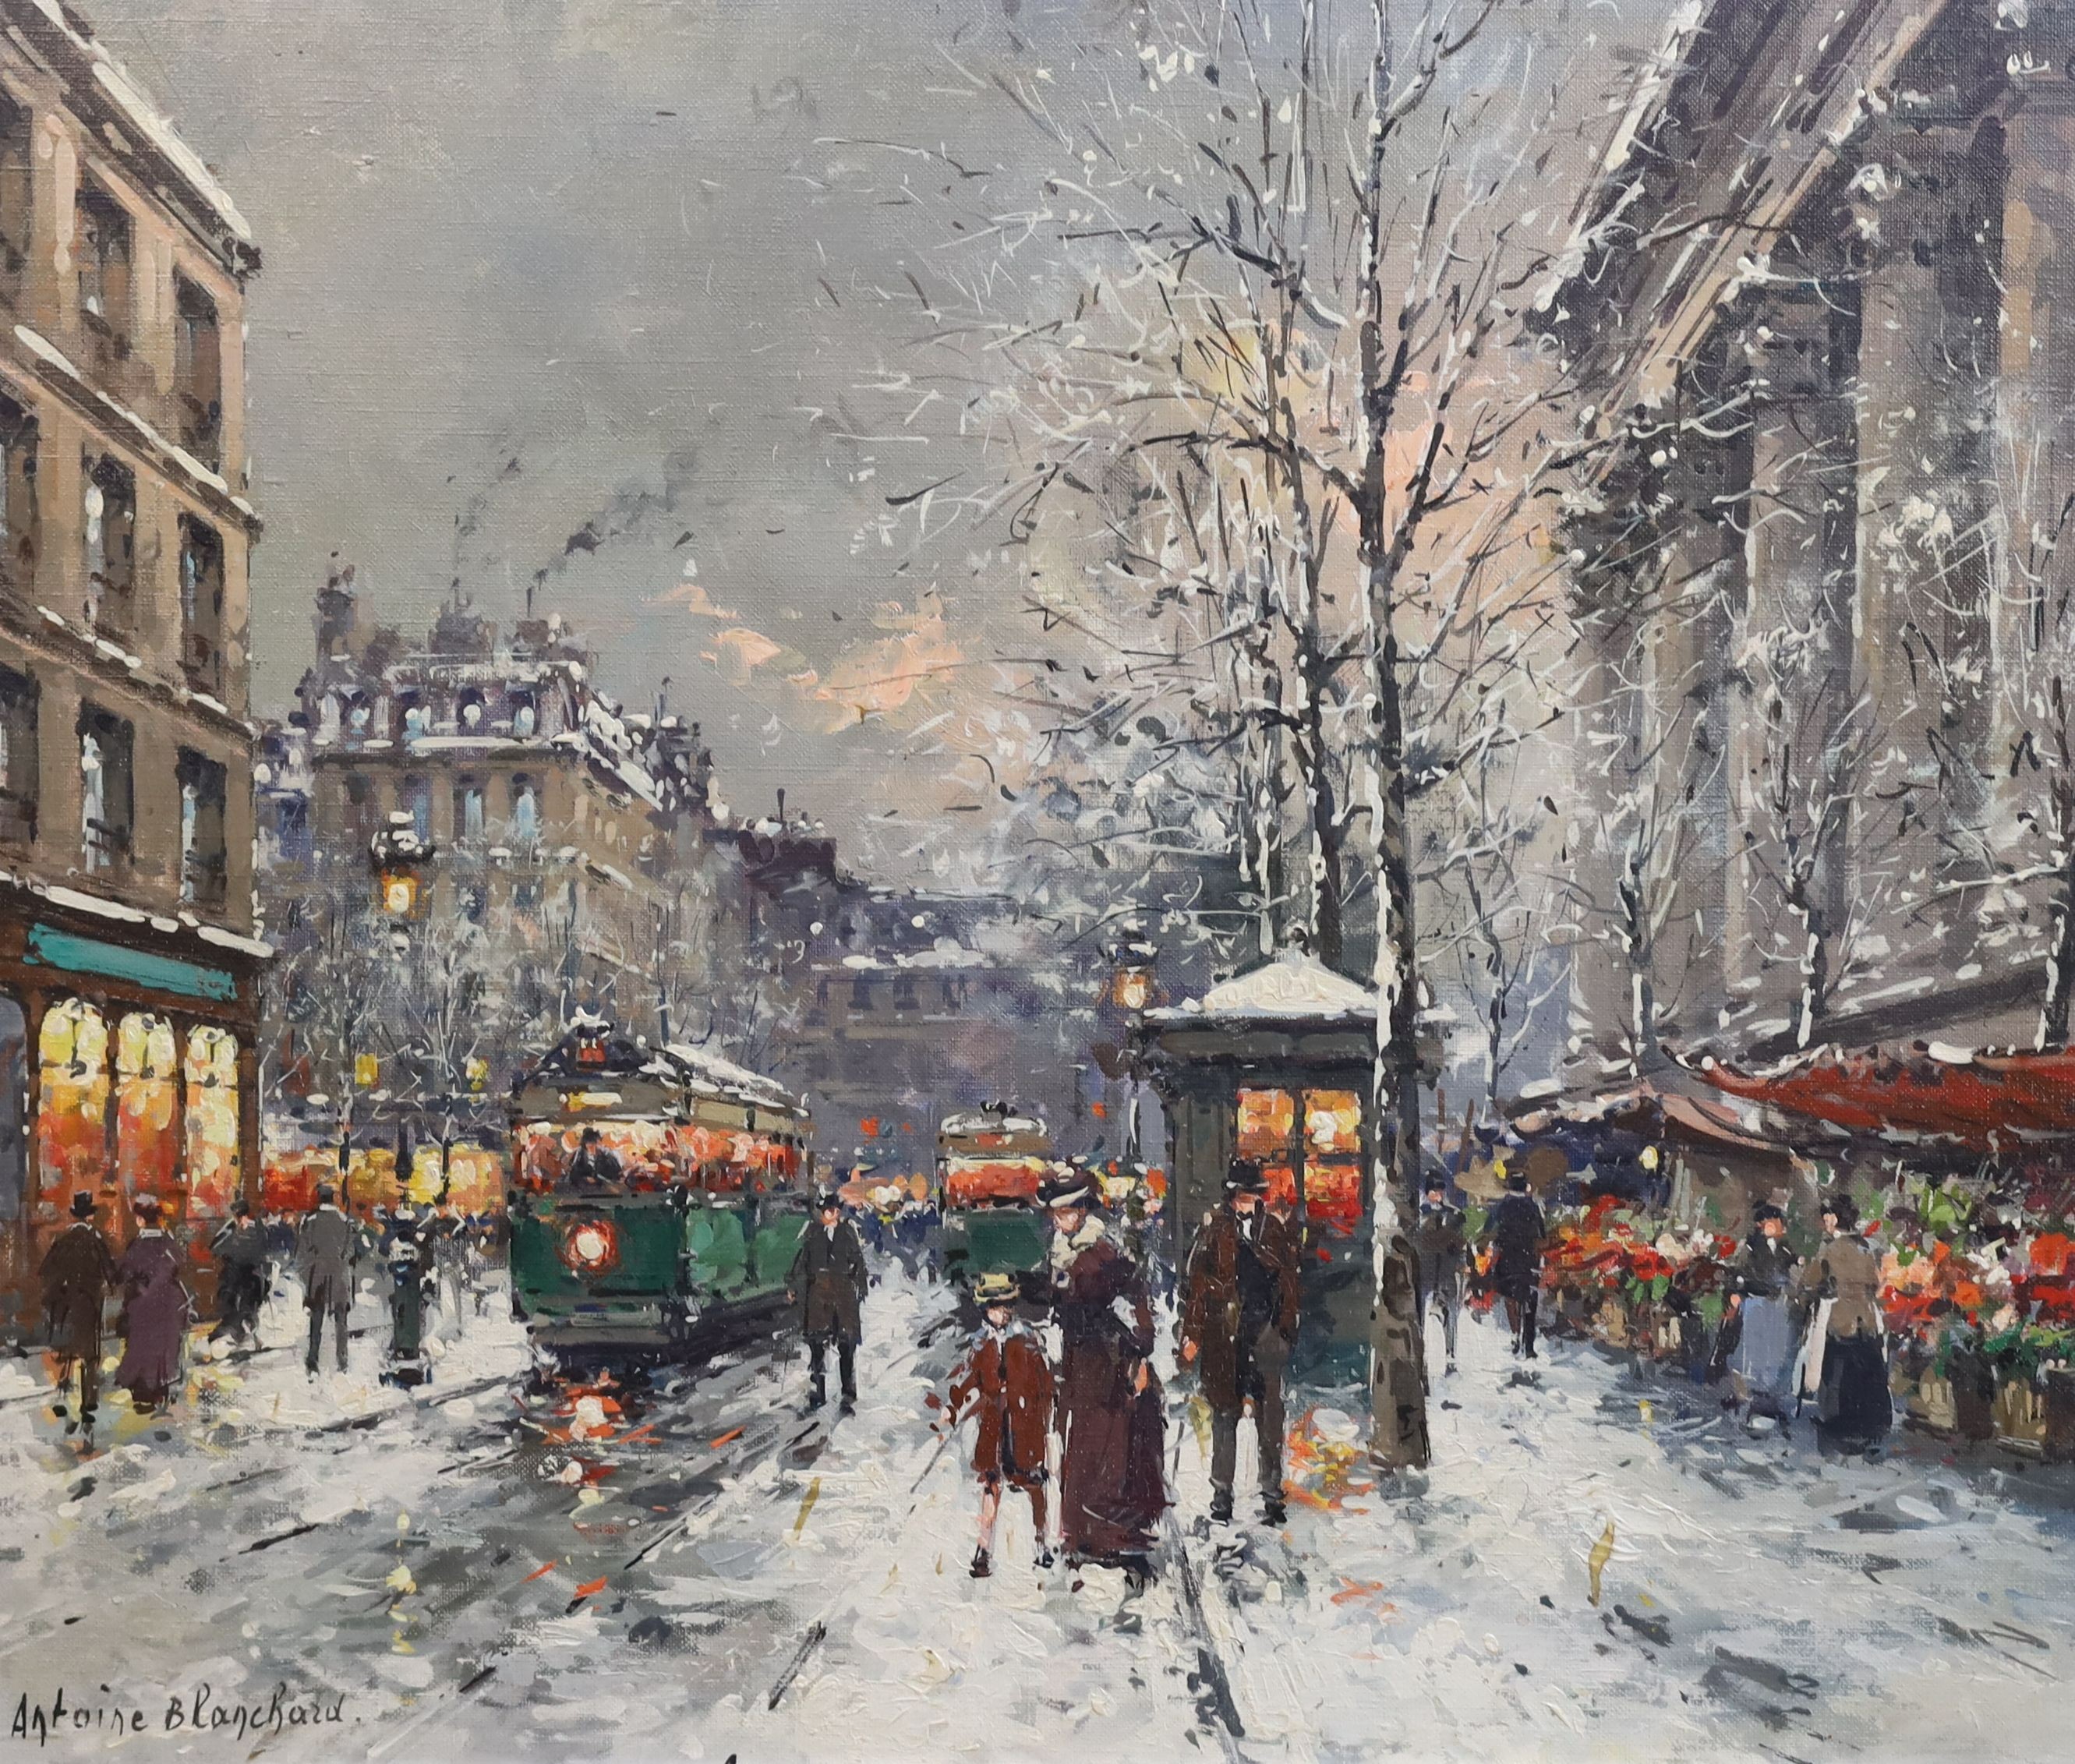 Antoine Blanchard (French, 1910-1988), Snow in Paris, oil on canvas, 45 x 53cm